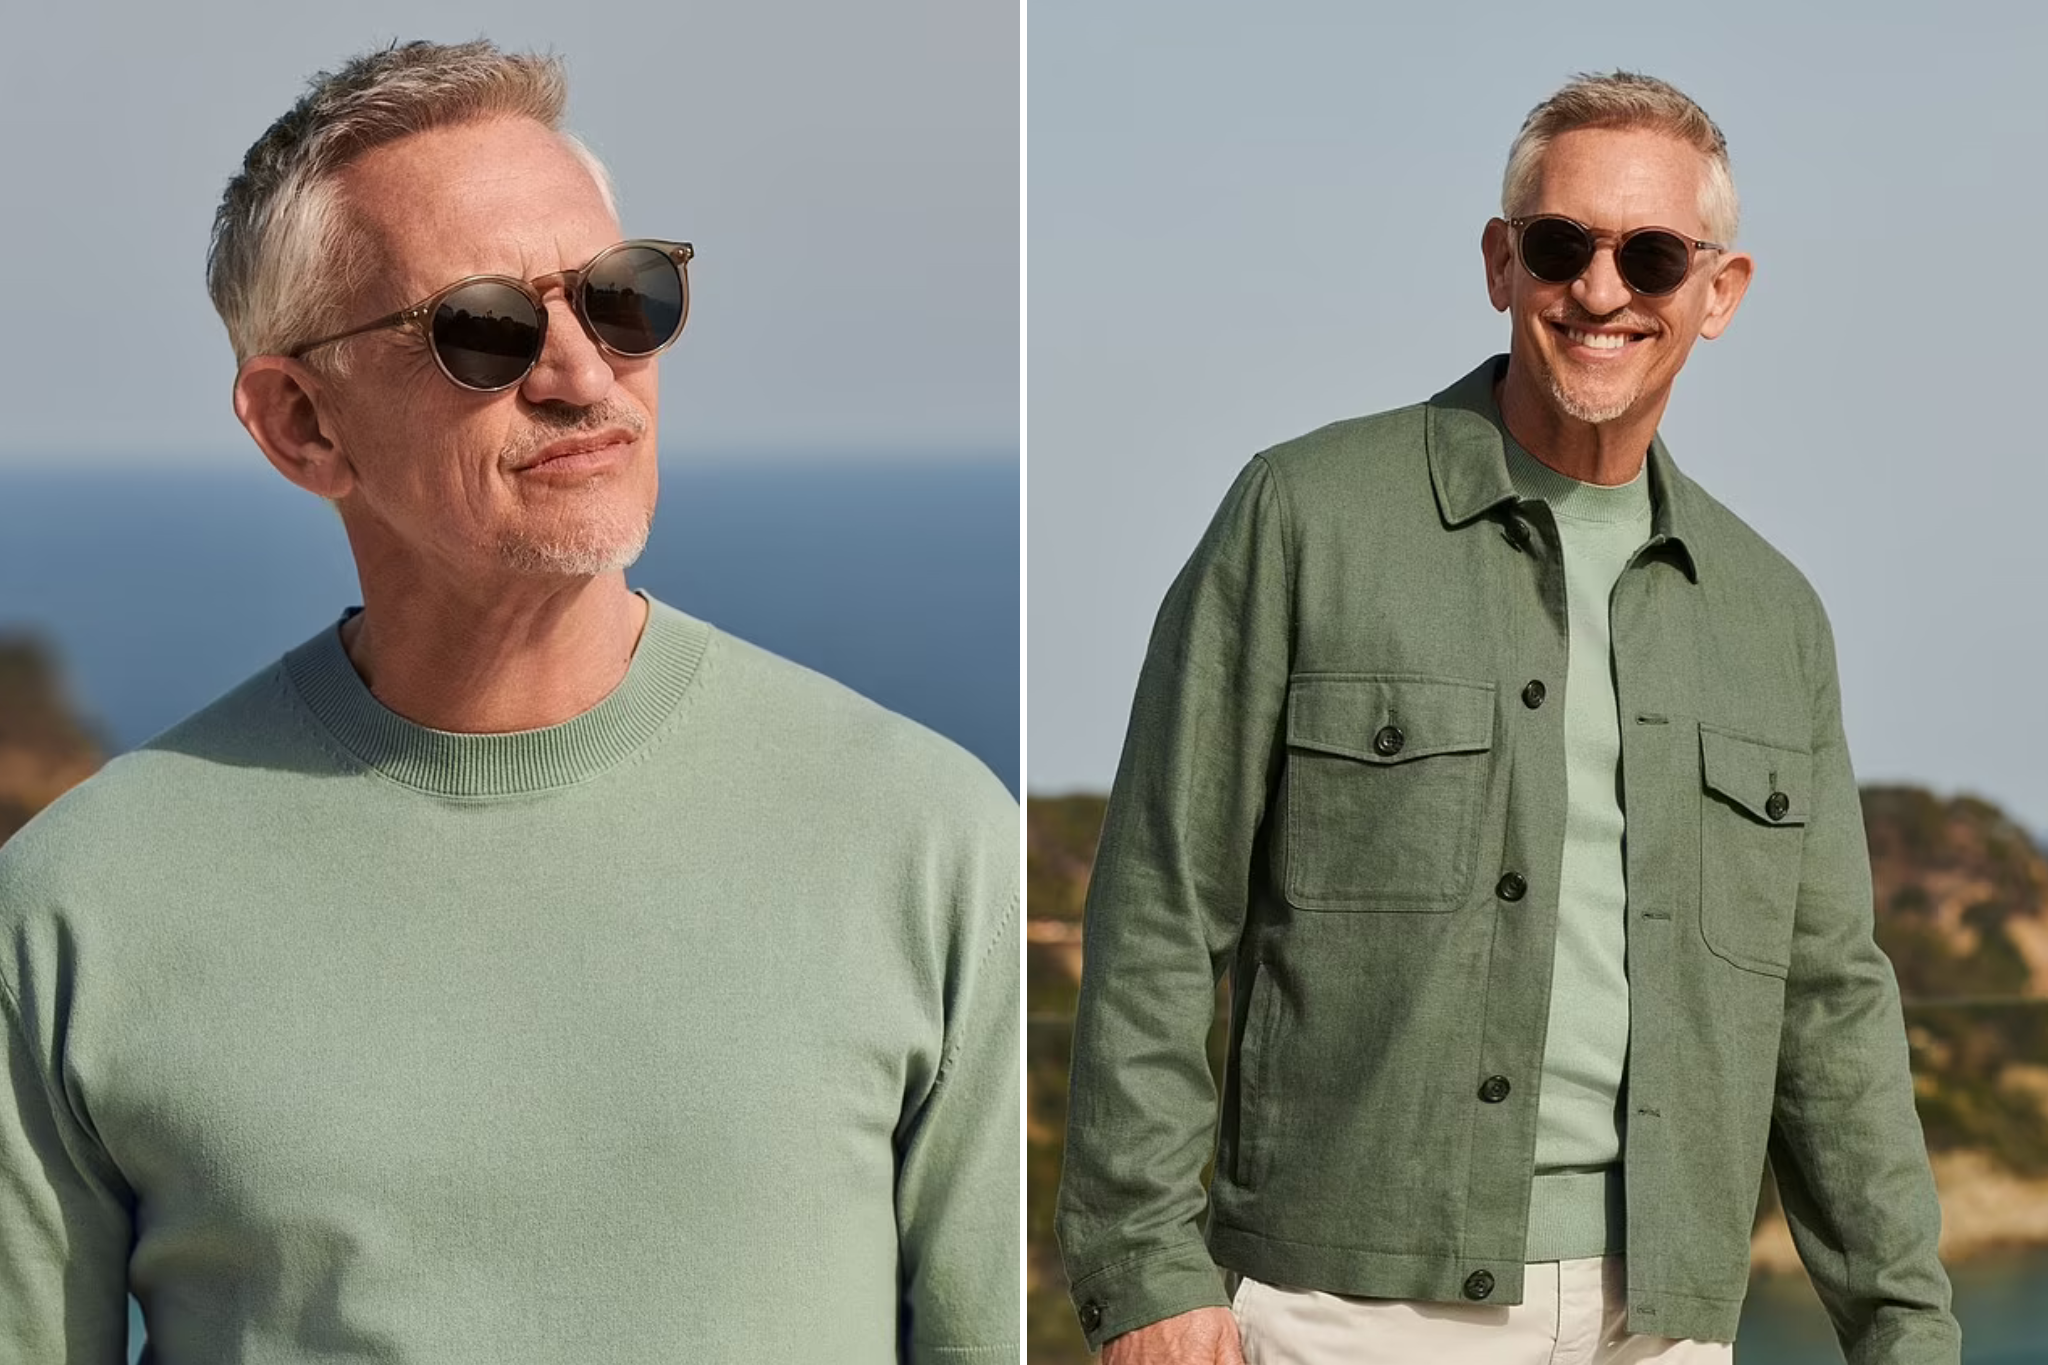 gary lineker, clothing line, gary lineker ‘breaks bbc advertising rules’ by wearing his clothing line on air